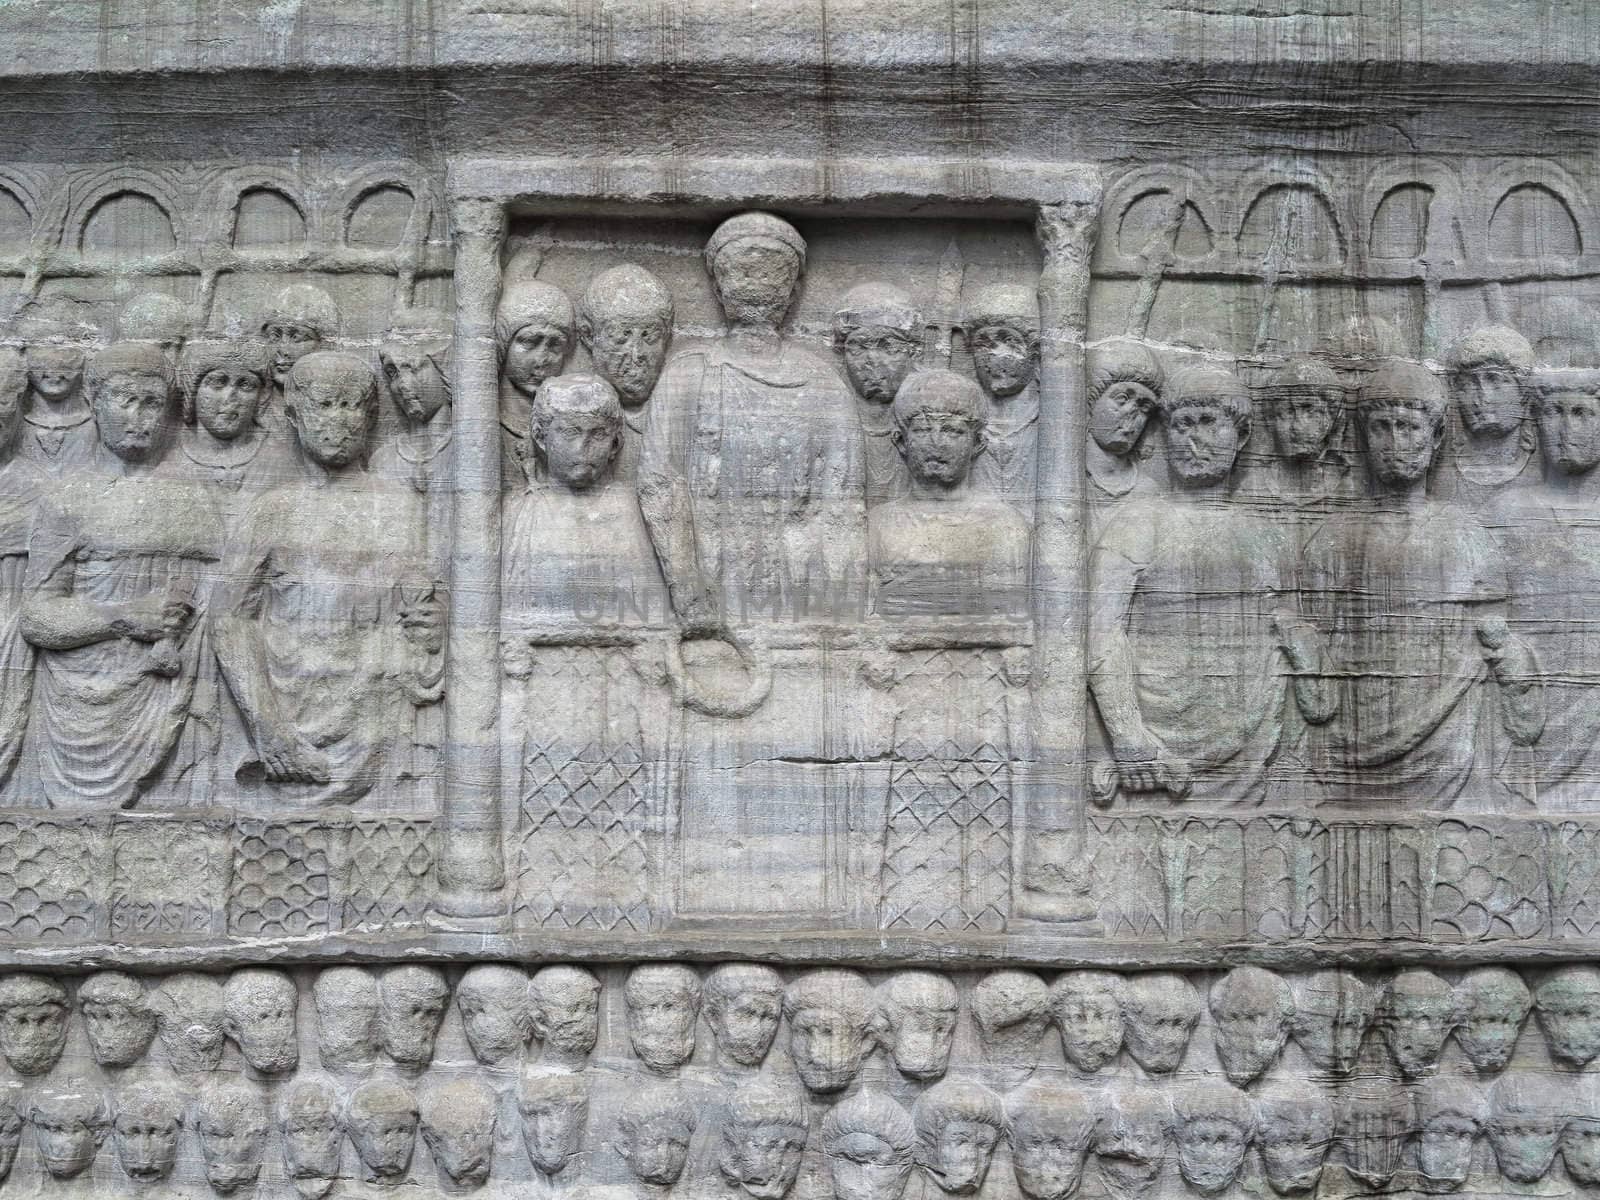 The base of the Obelisk of Thutmosis III showing Emperor Theodosius as he offers a laurel wreath to the victor from the Kathisma at the Hippodrome, Istanbul, Turkey.